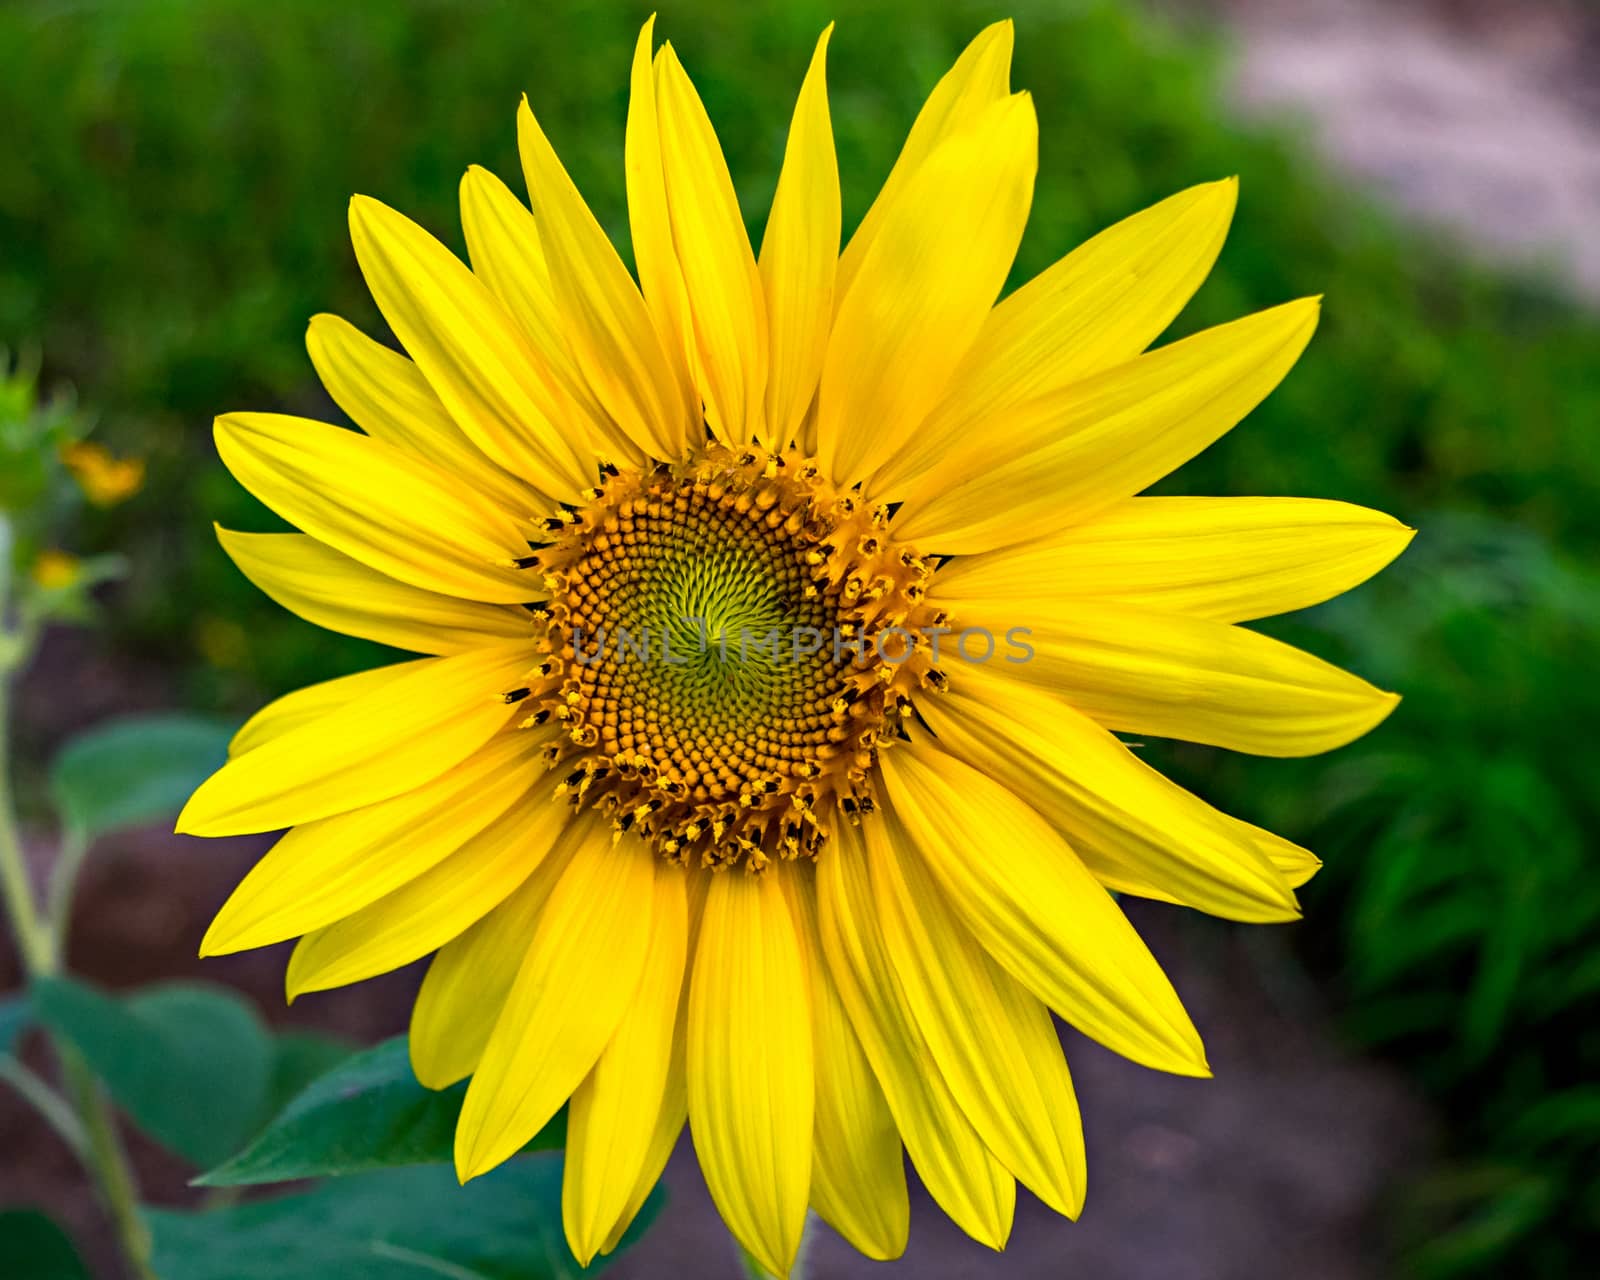 Close up, isolated  image of a Sunflower shinning in the sunlight. Scientific name : Helianthus. by lalam